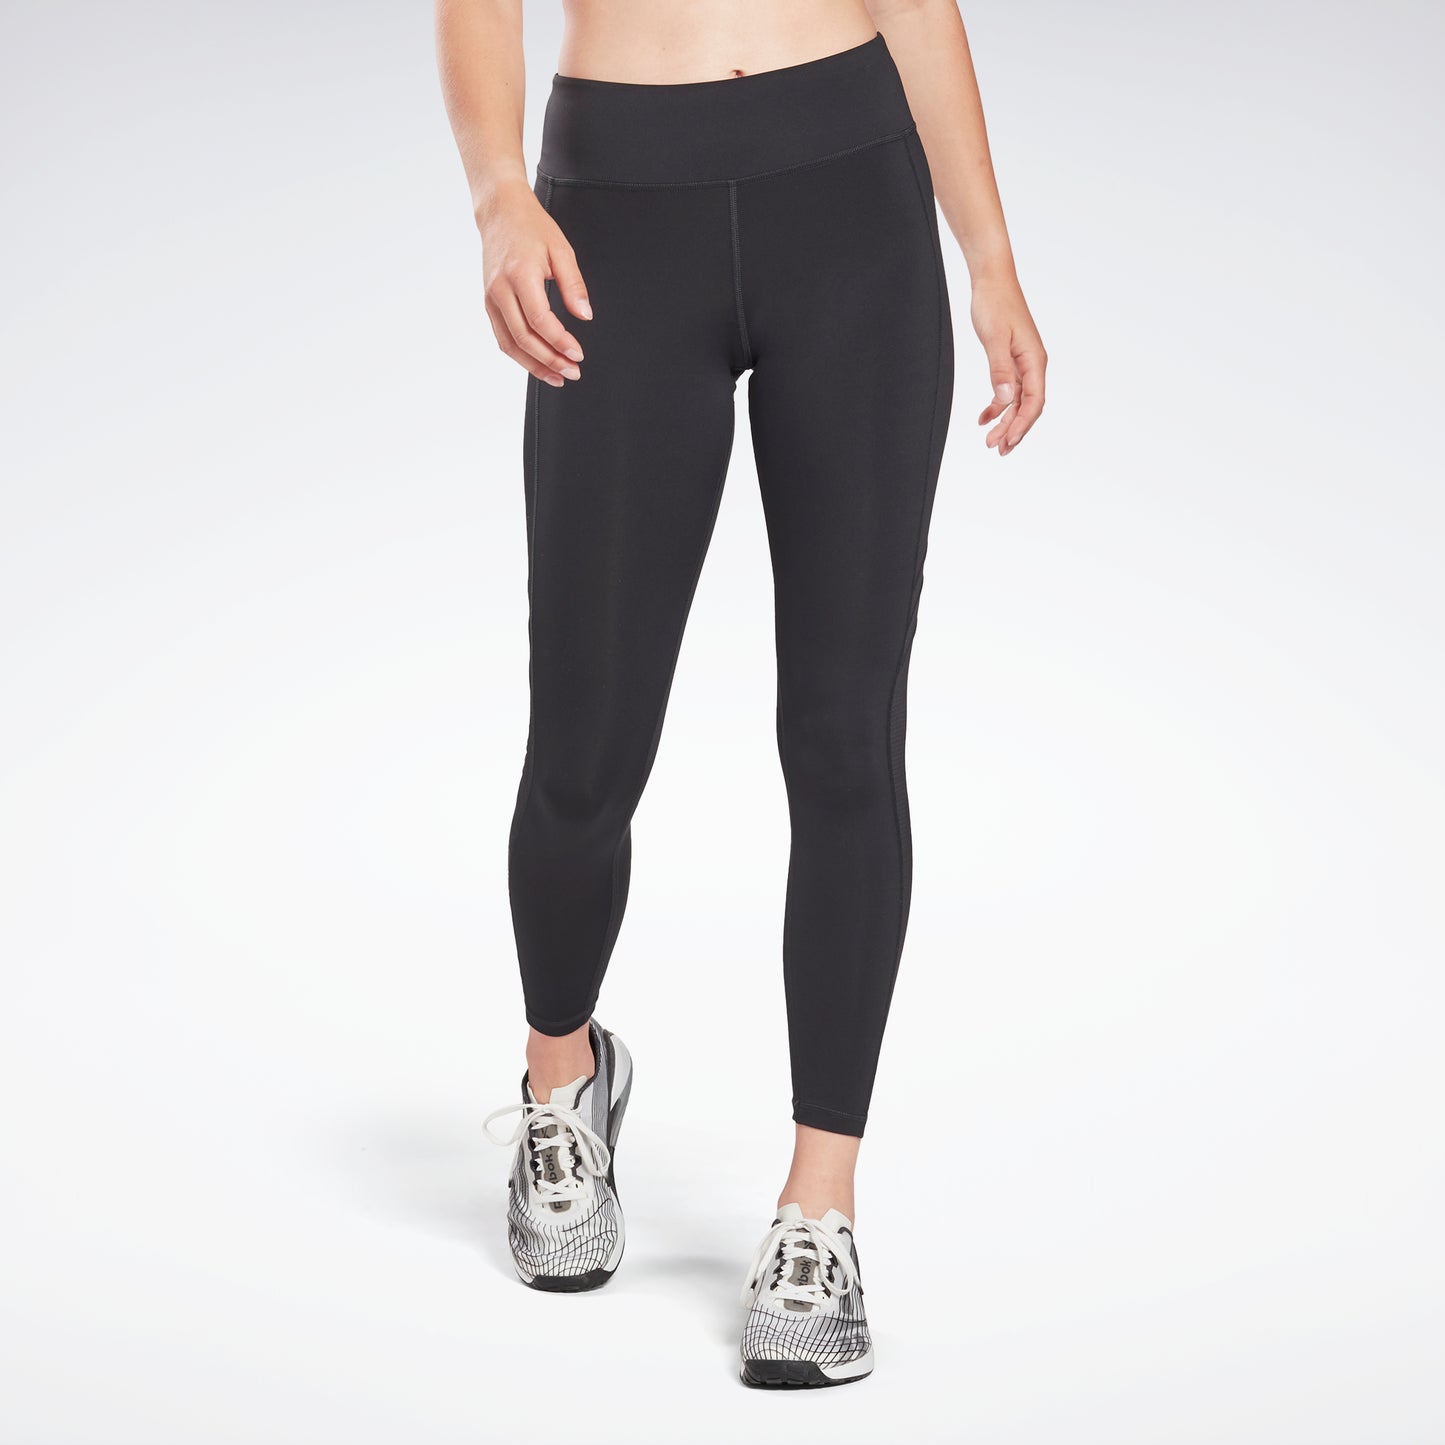 Women's Active Lace-Up Mesh Side Workout Legging 